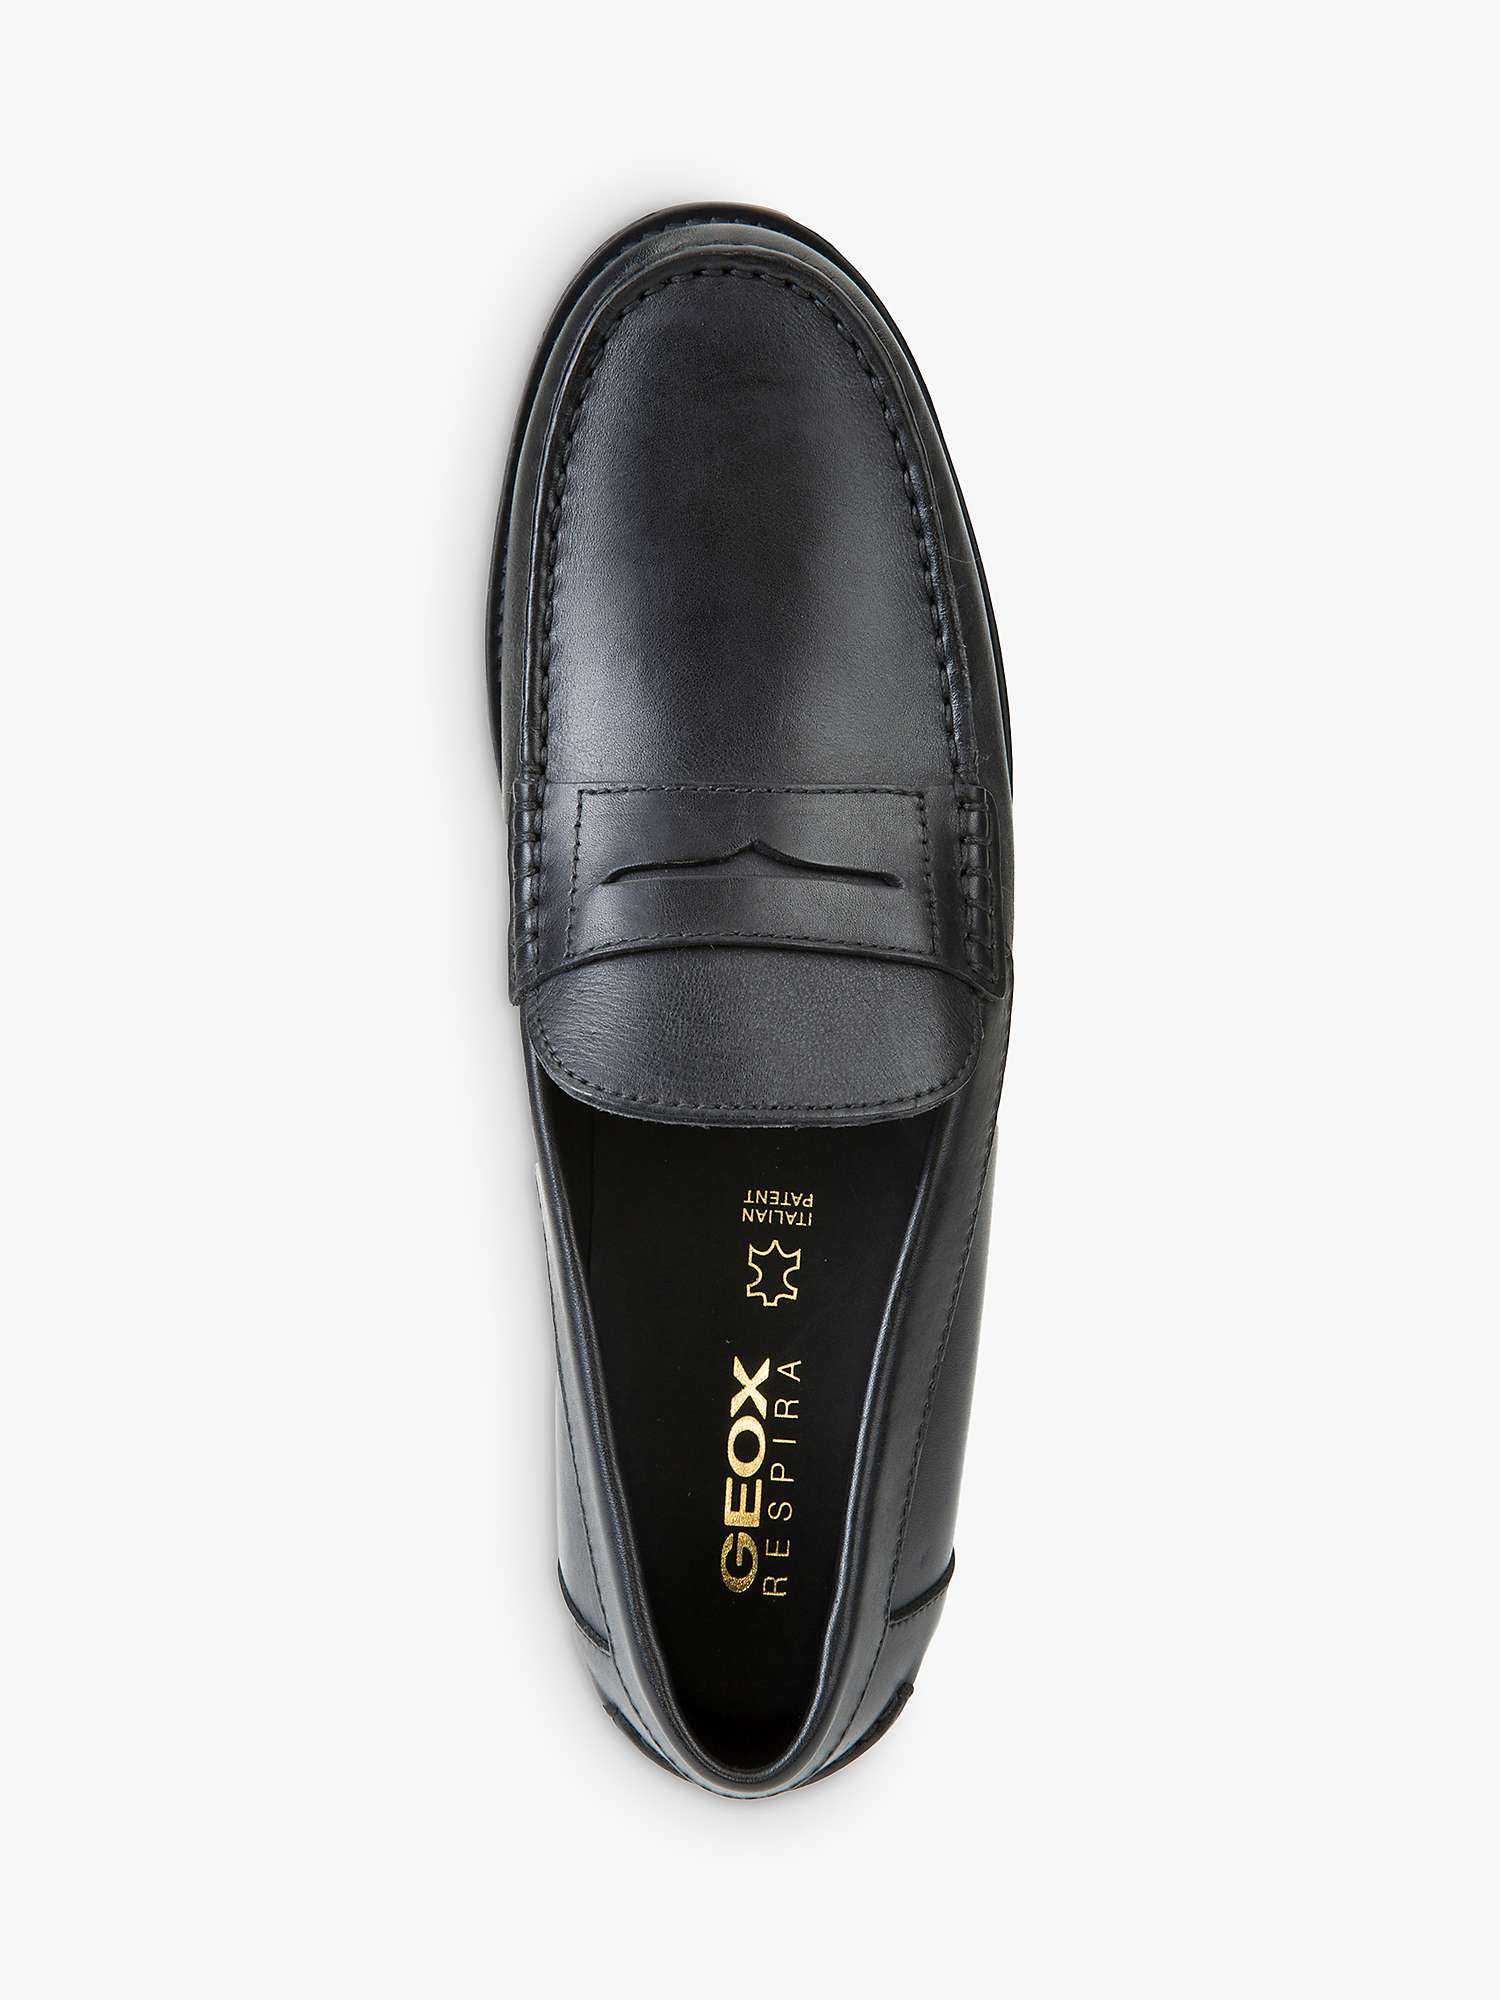 Buy Geox New Damon Loafers, Black Online at johnlewis.com